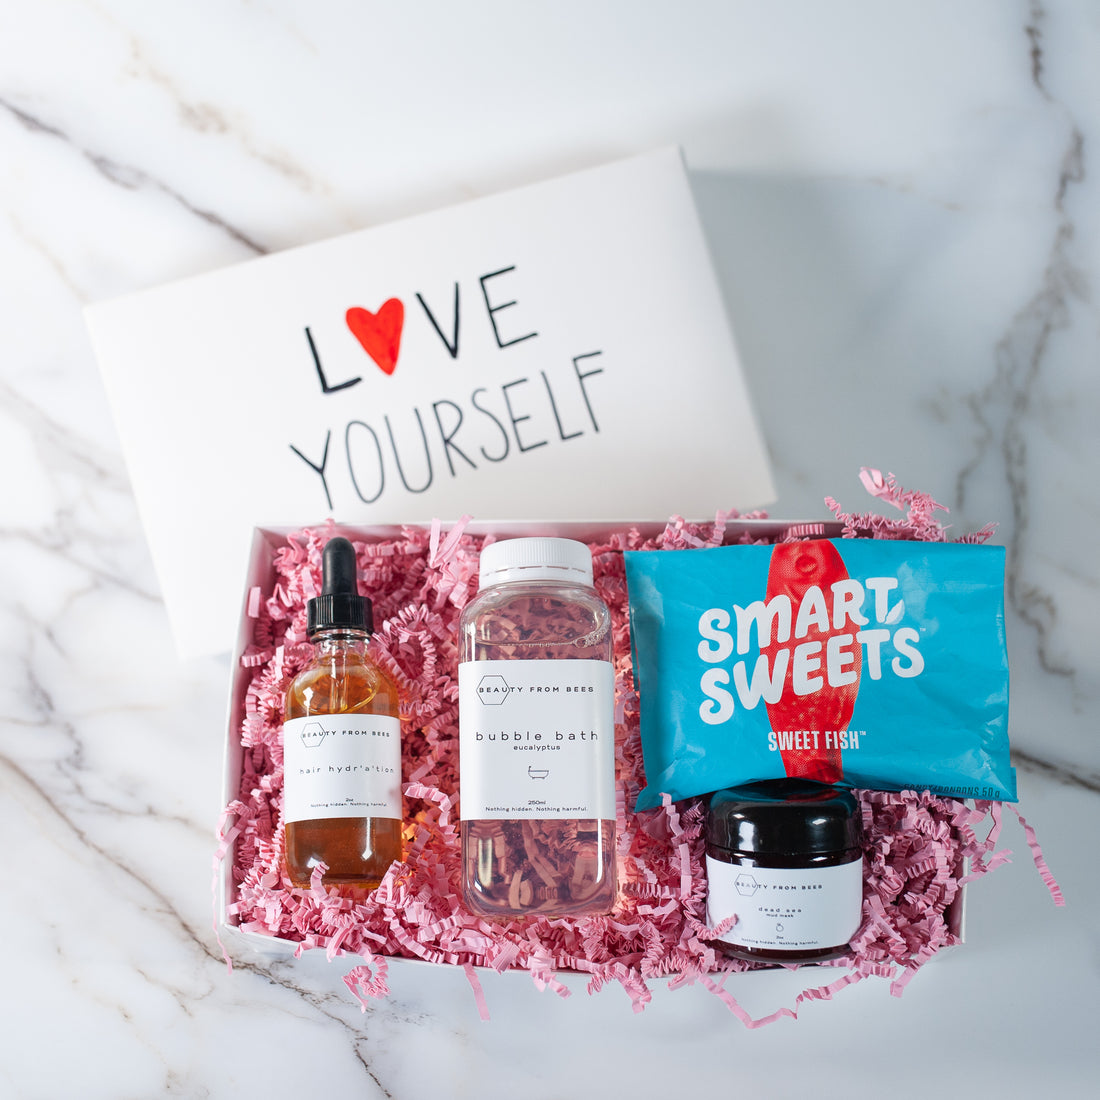 Pamper, Spoil, and Treat Yourself!